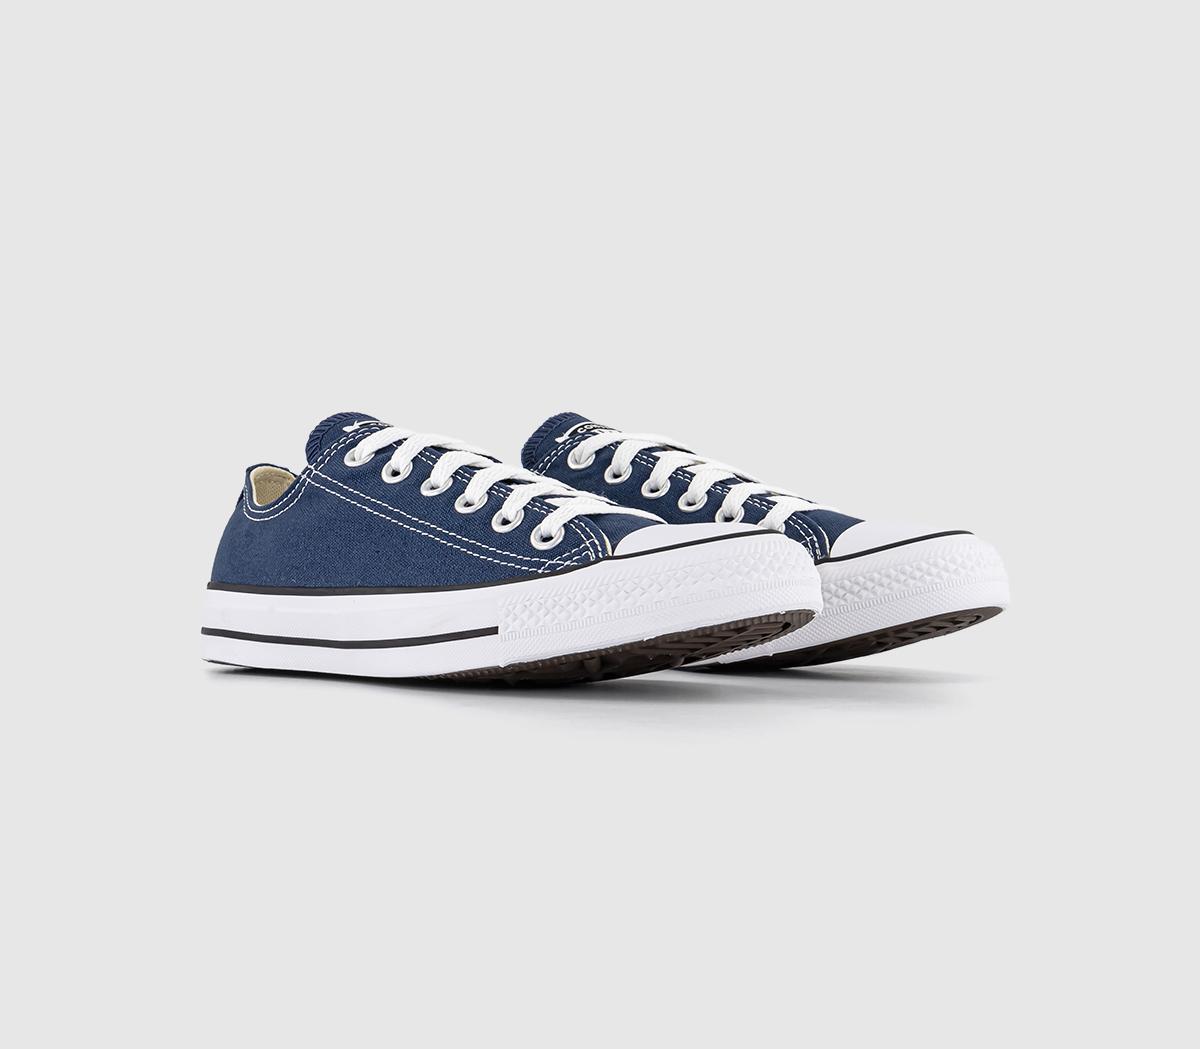 Converse Mens All Star Low Navy Canvas Trainers In Blue / White, 12